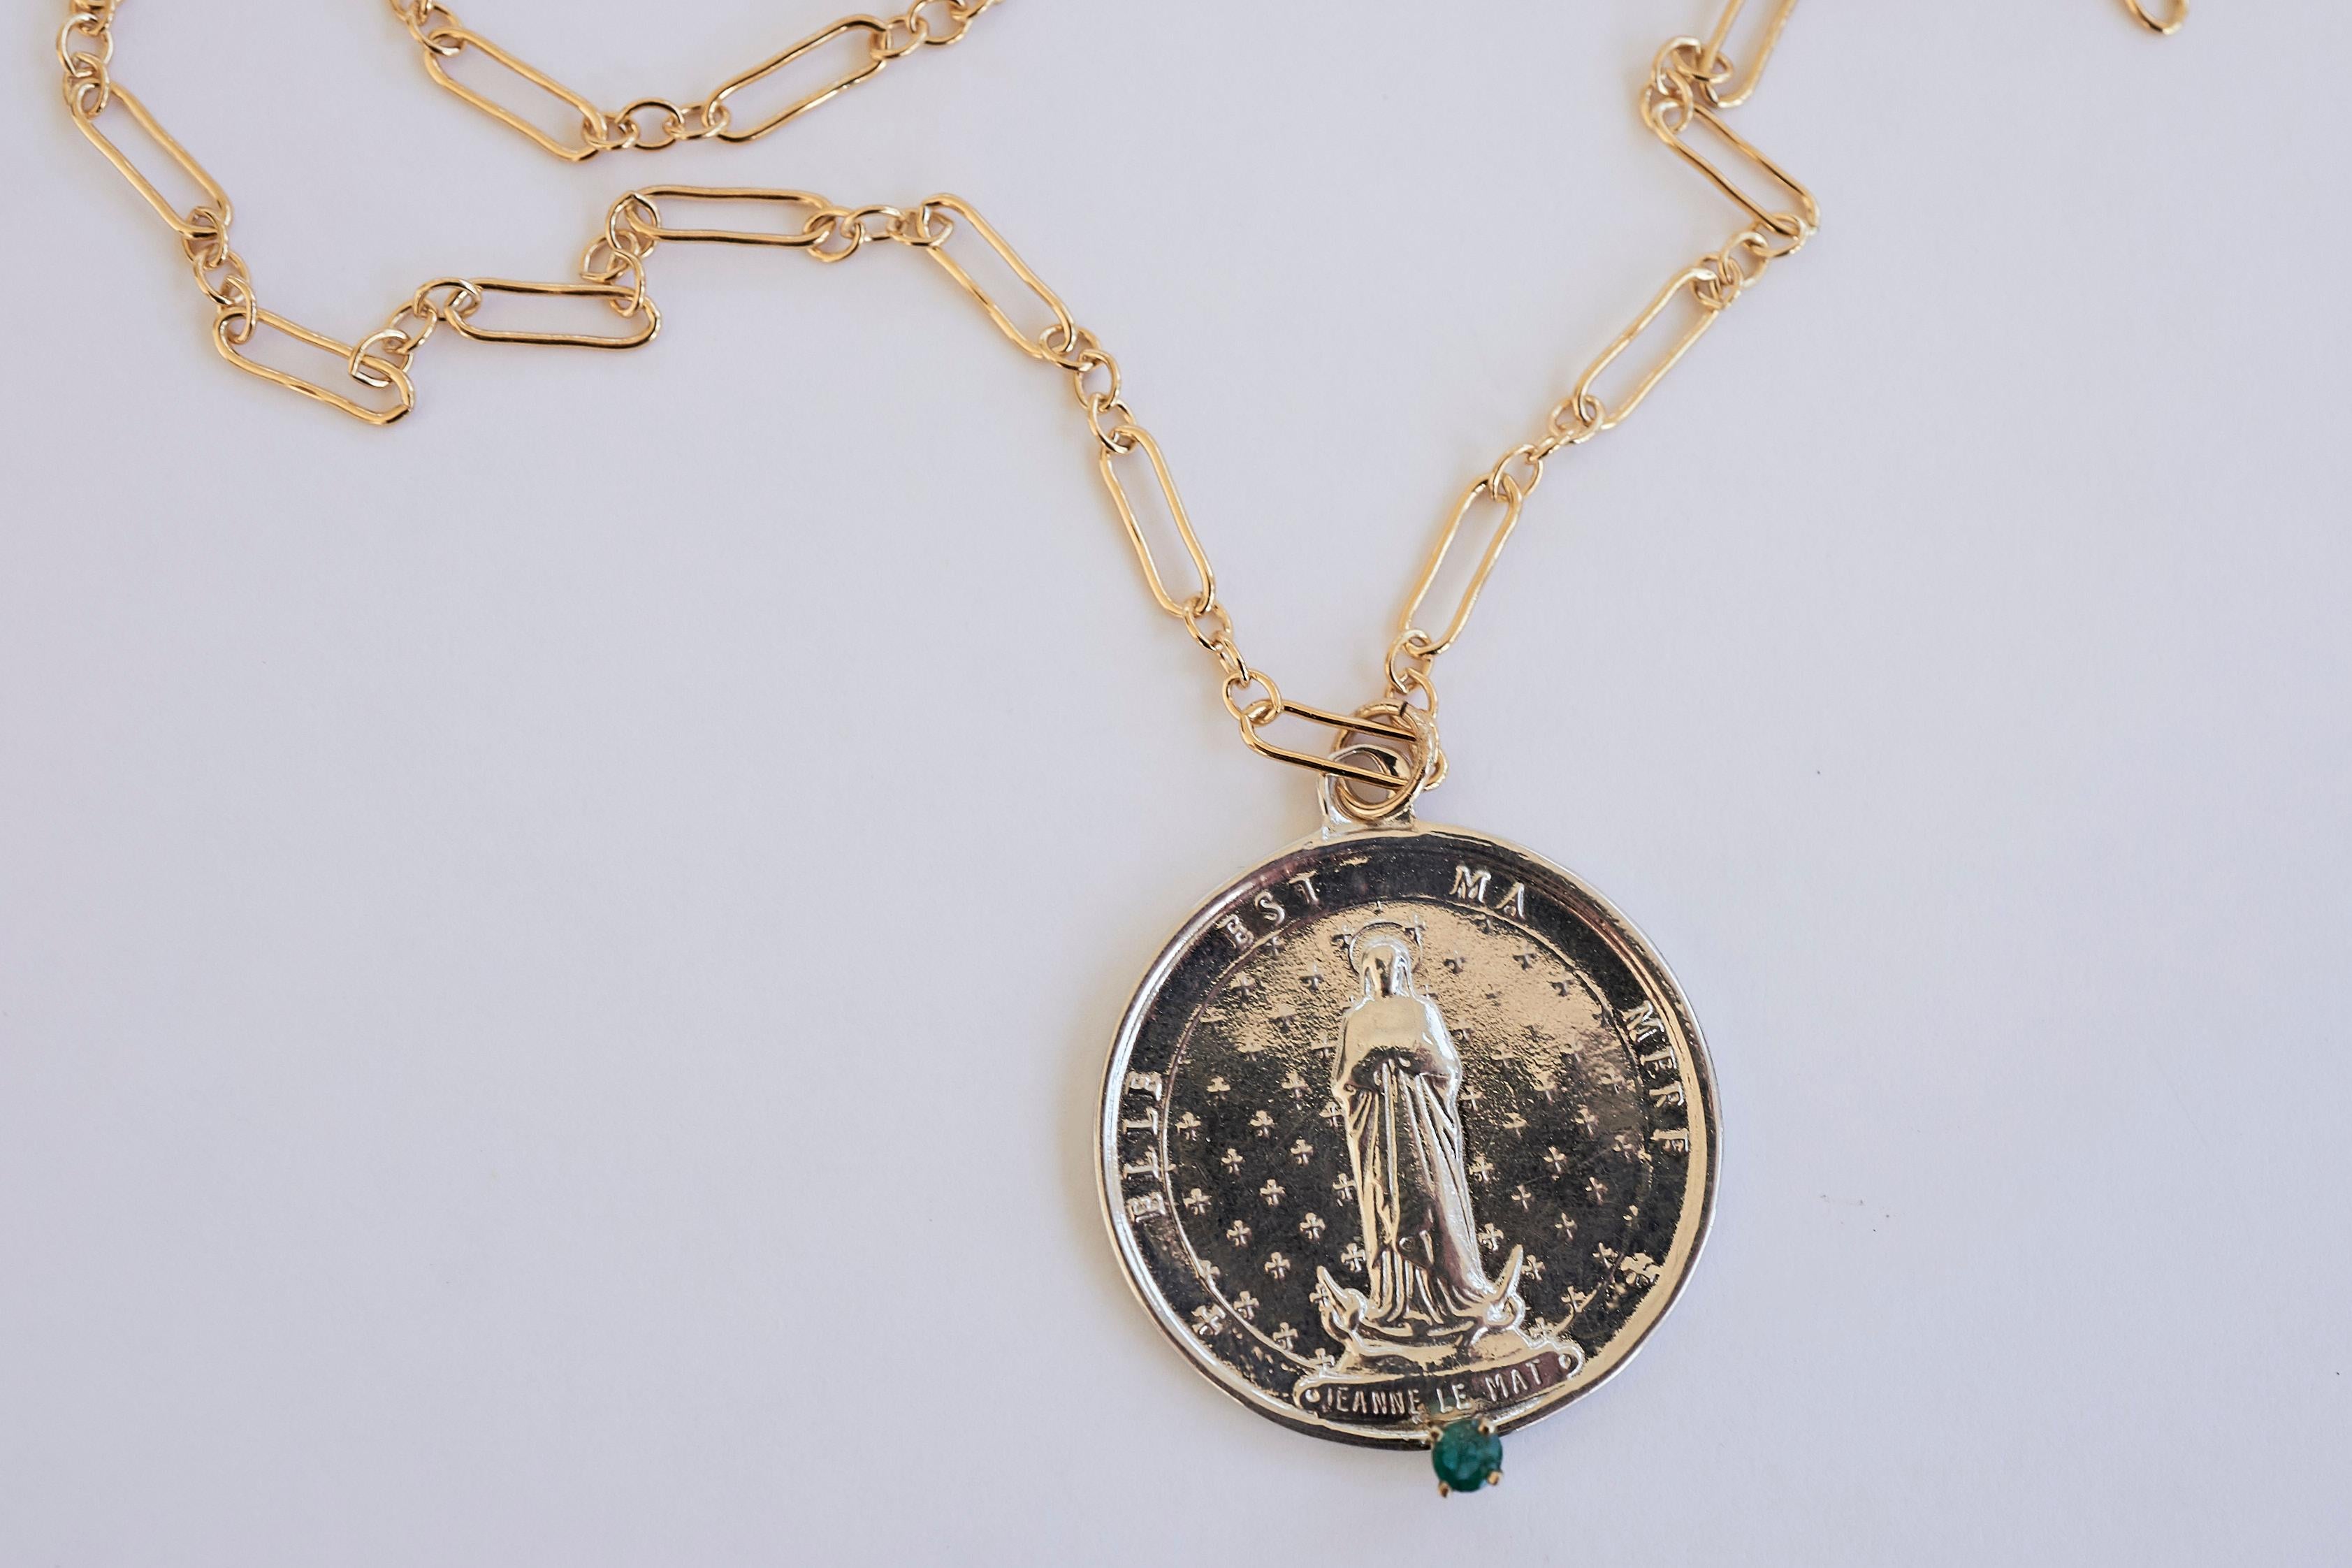 Contemporary Emerald Saint Medal Coin Silver Jeanne Le Mat Necklace Chain J Dauphin For Sale